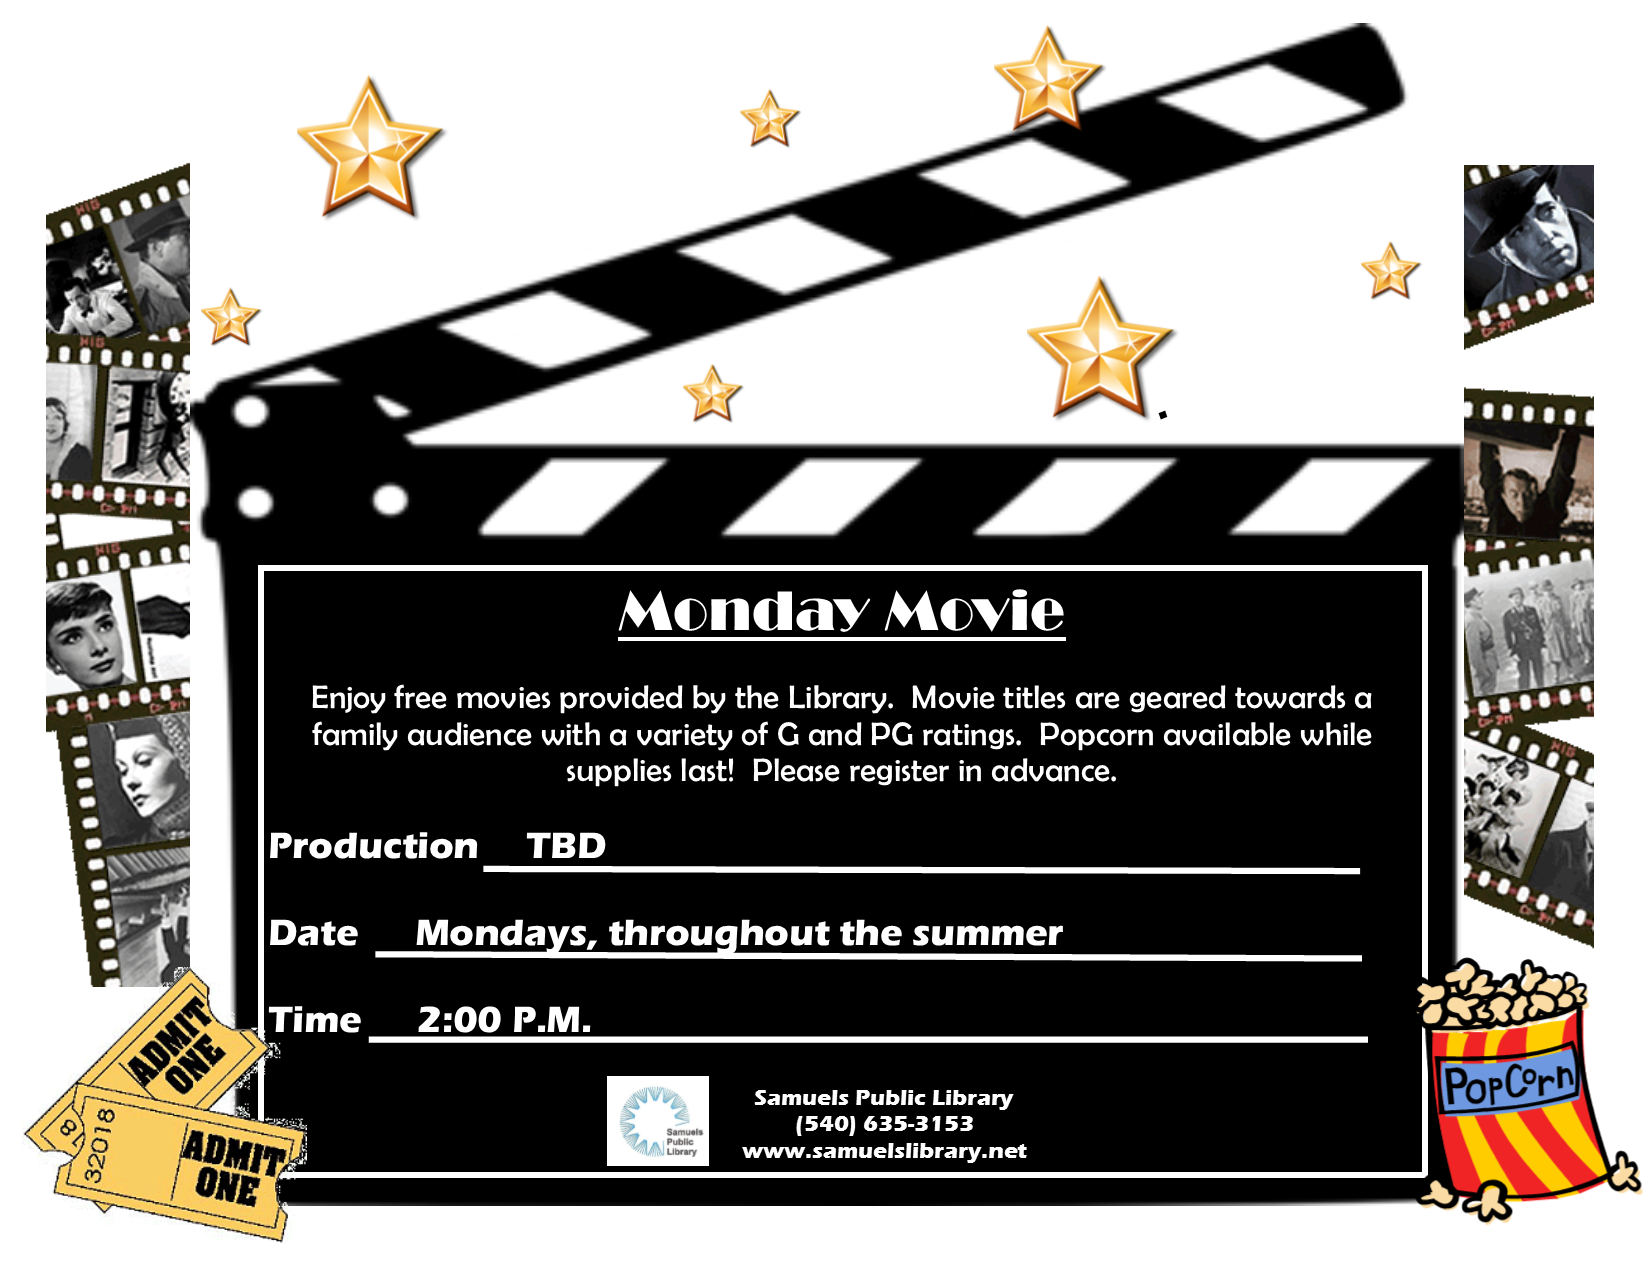 Come to Monday Movies this summer!